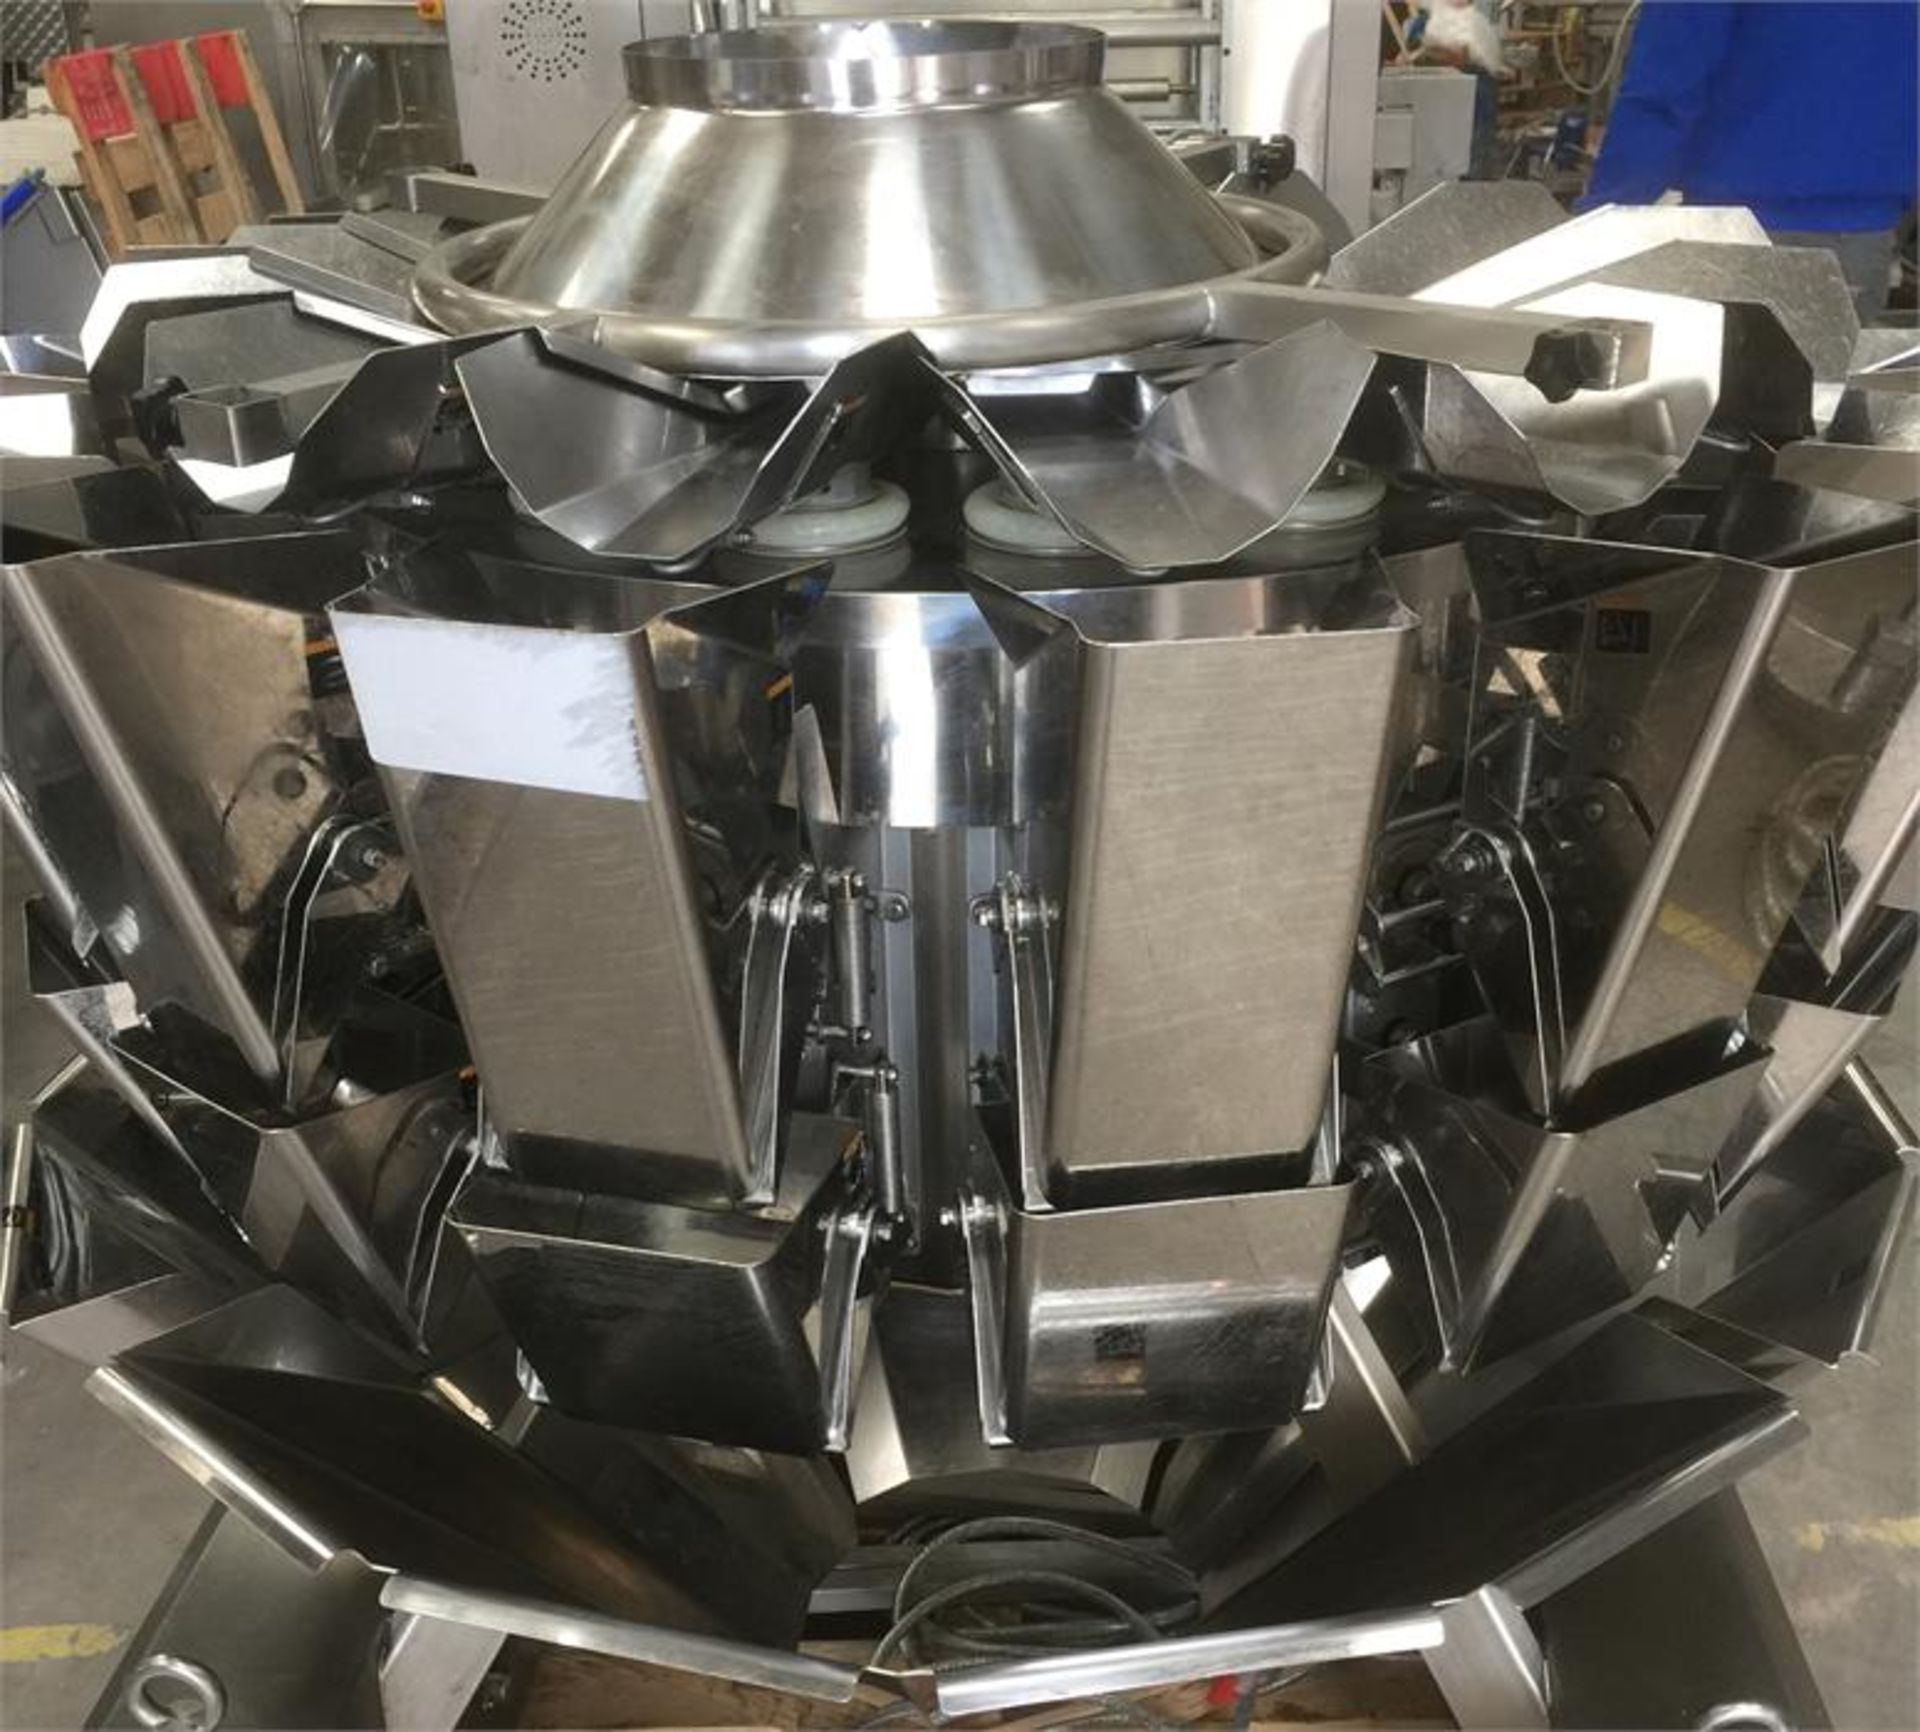 14 HEAD MULTIHEAD WEIGHER - Image 2 of 3